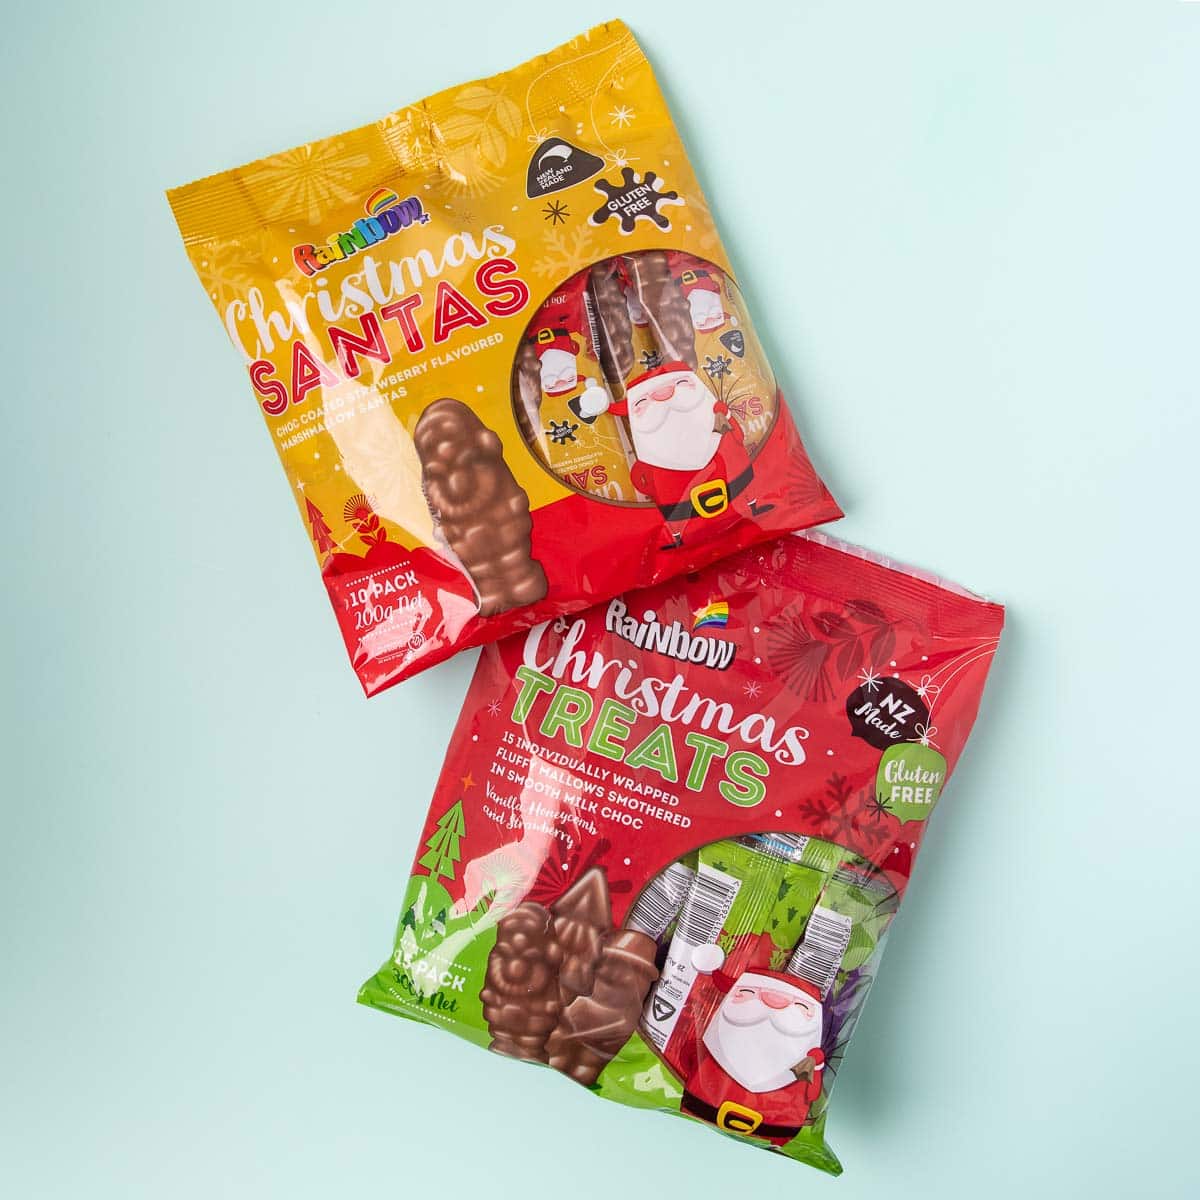 A bag of Rainbow brand marshmallow Santas, and Christmas Treats, on a mint green background.